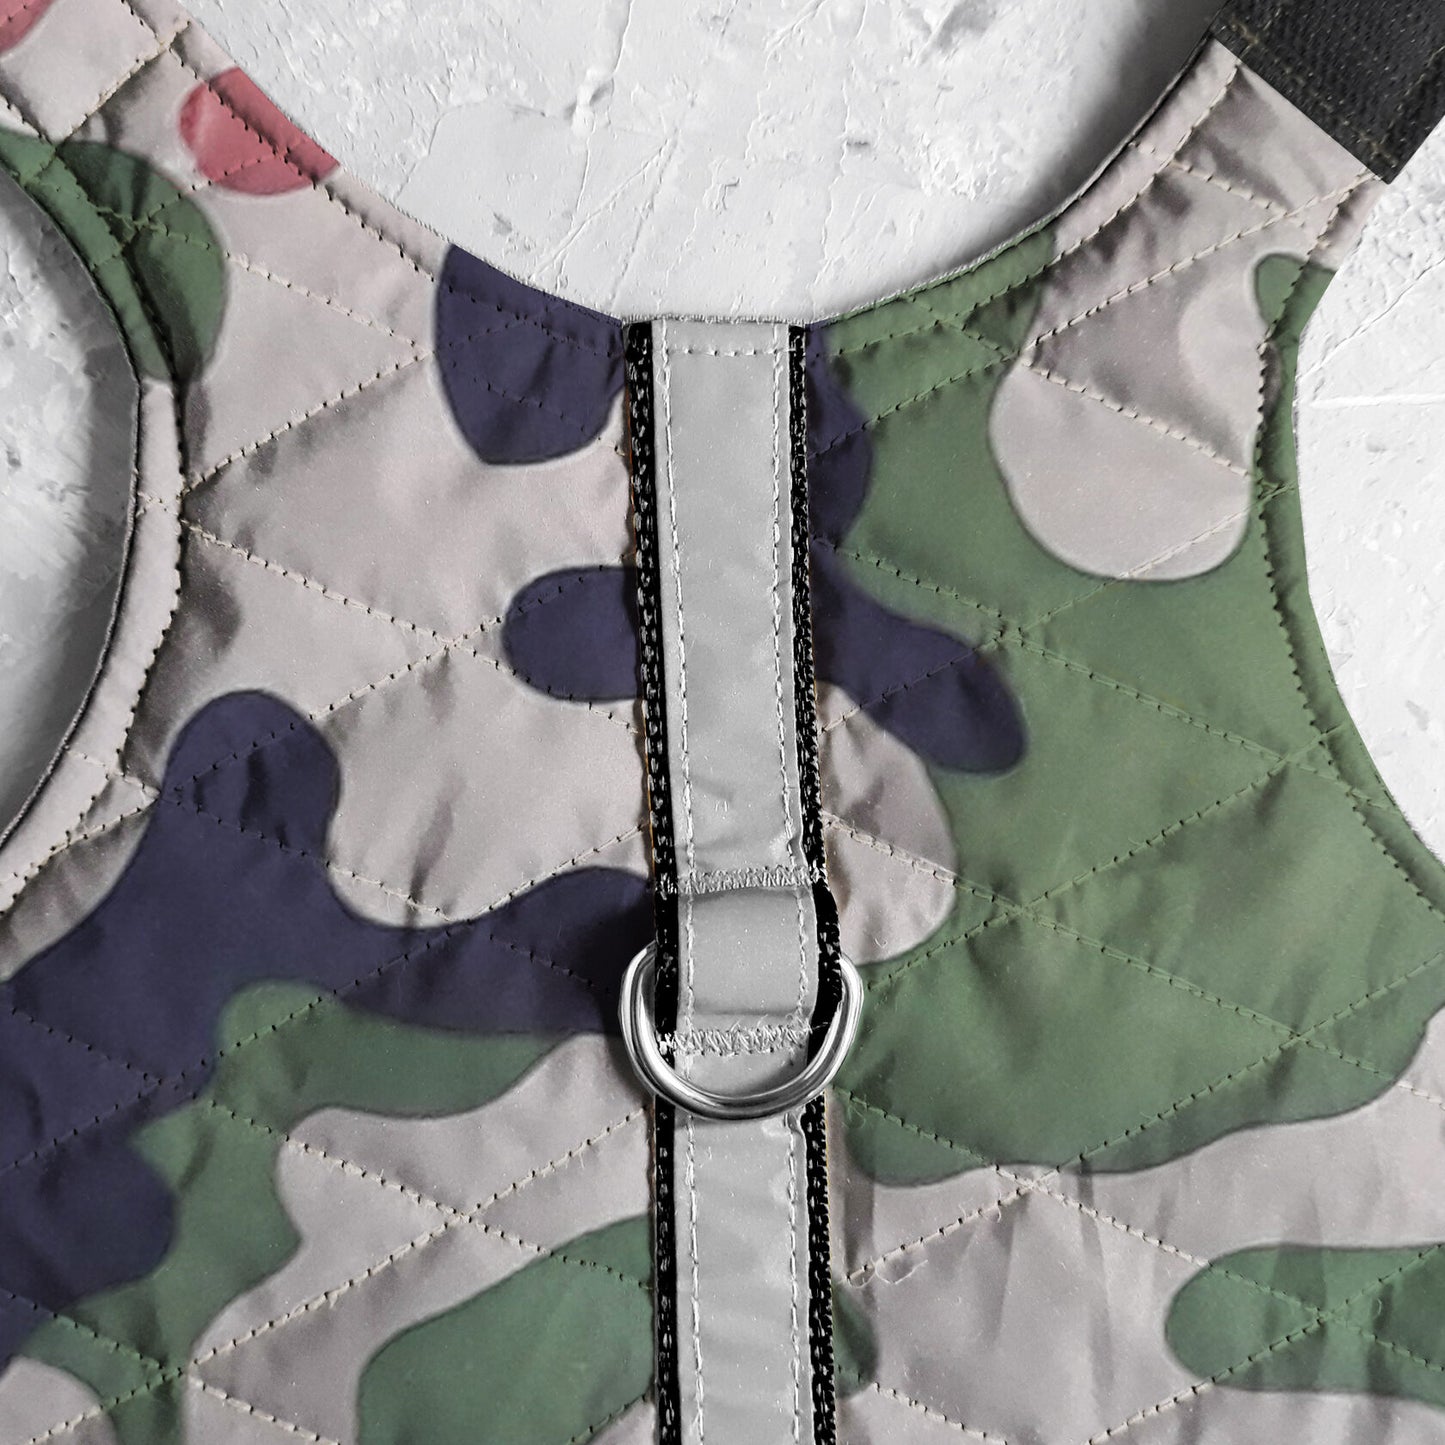 Difficult to escape camo safety quilted cat harness with reflective stripe